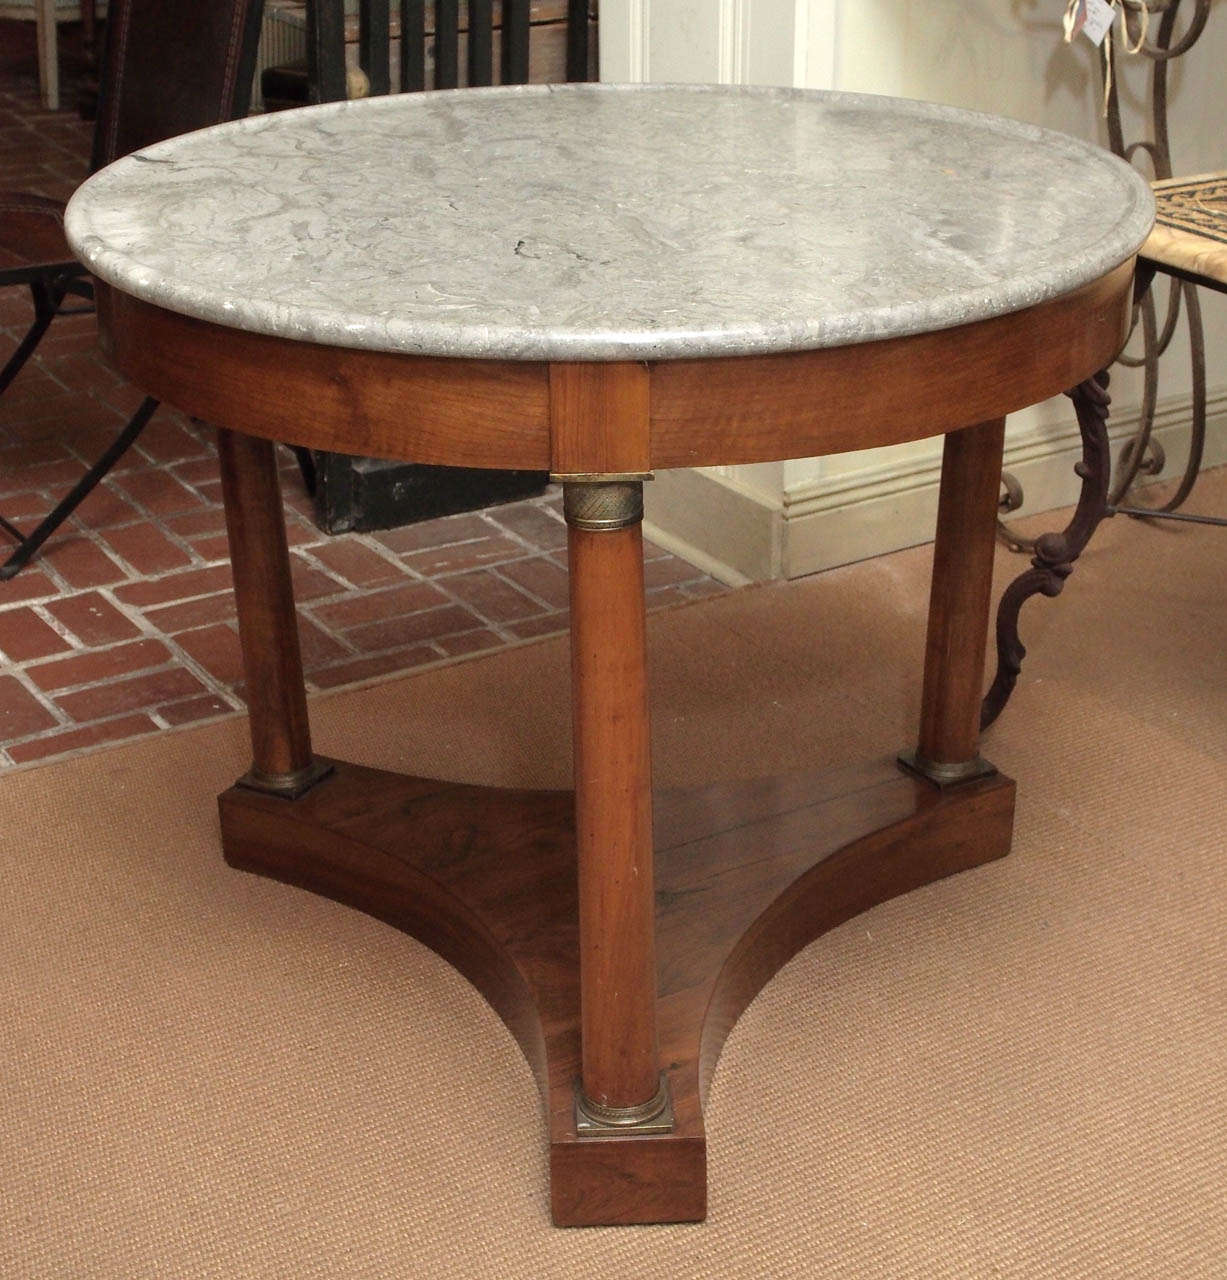 An Empire style walnut gueridon with grey marble top and brass accents